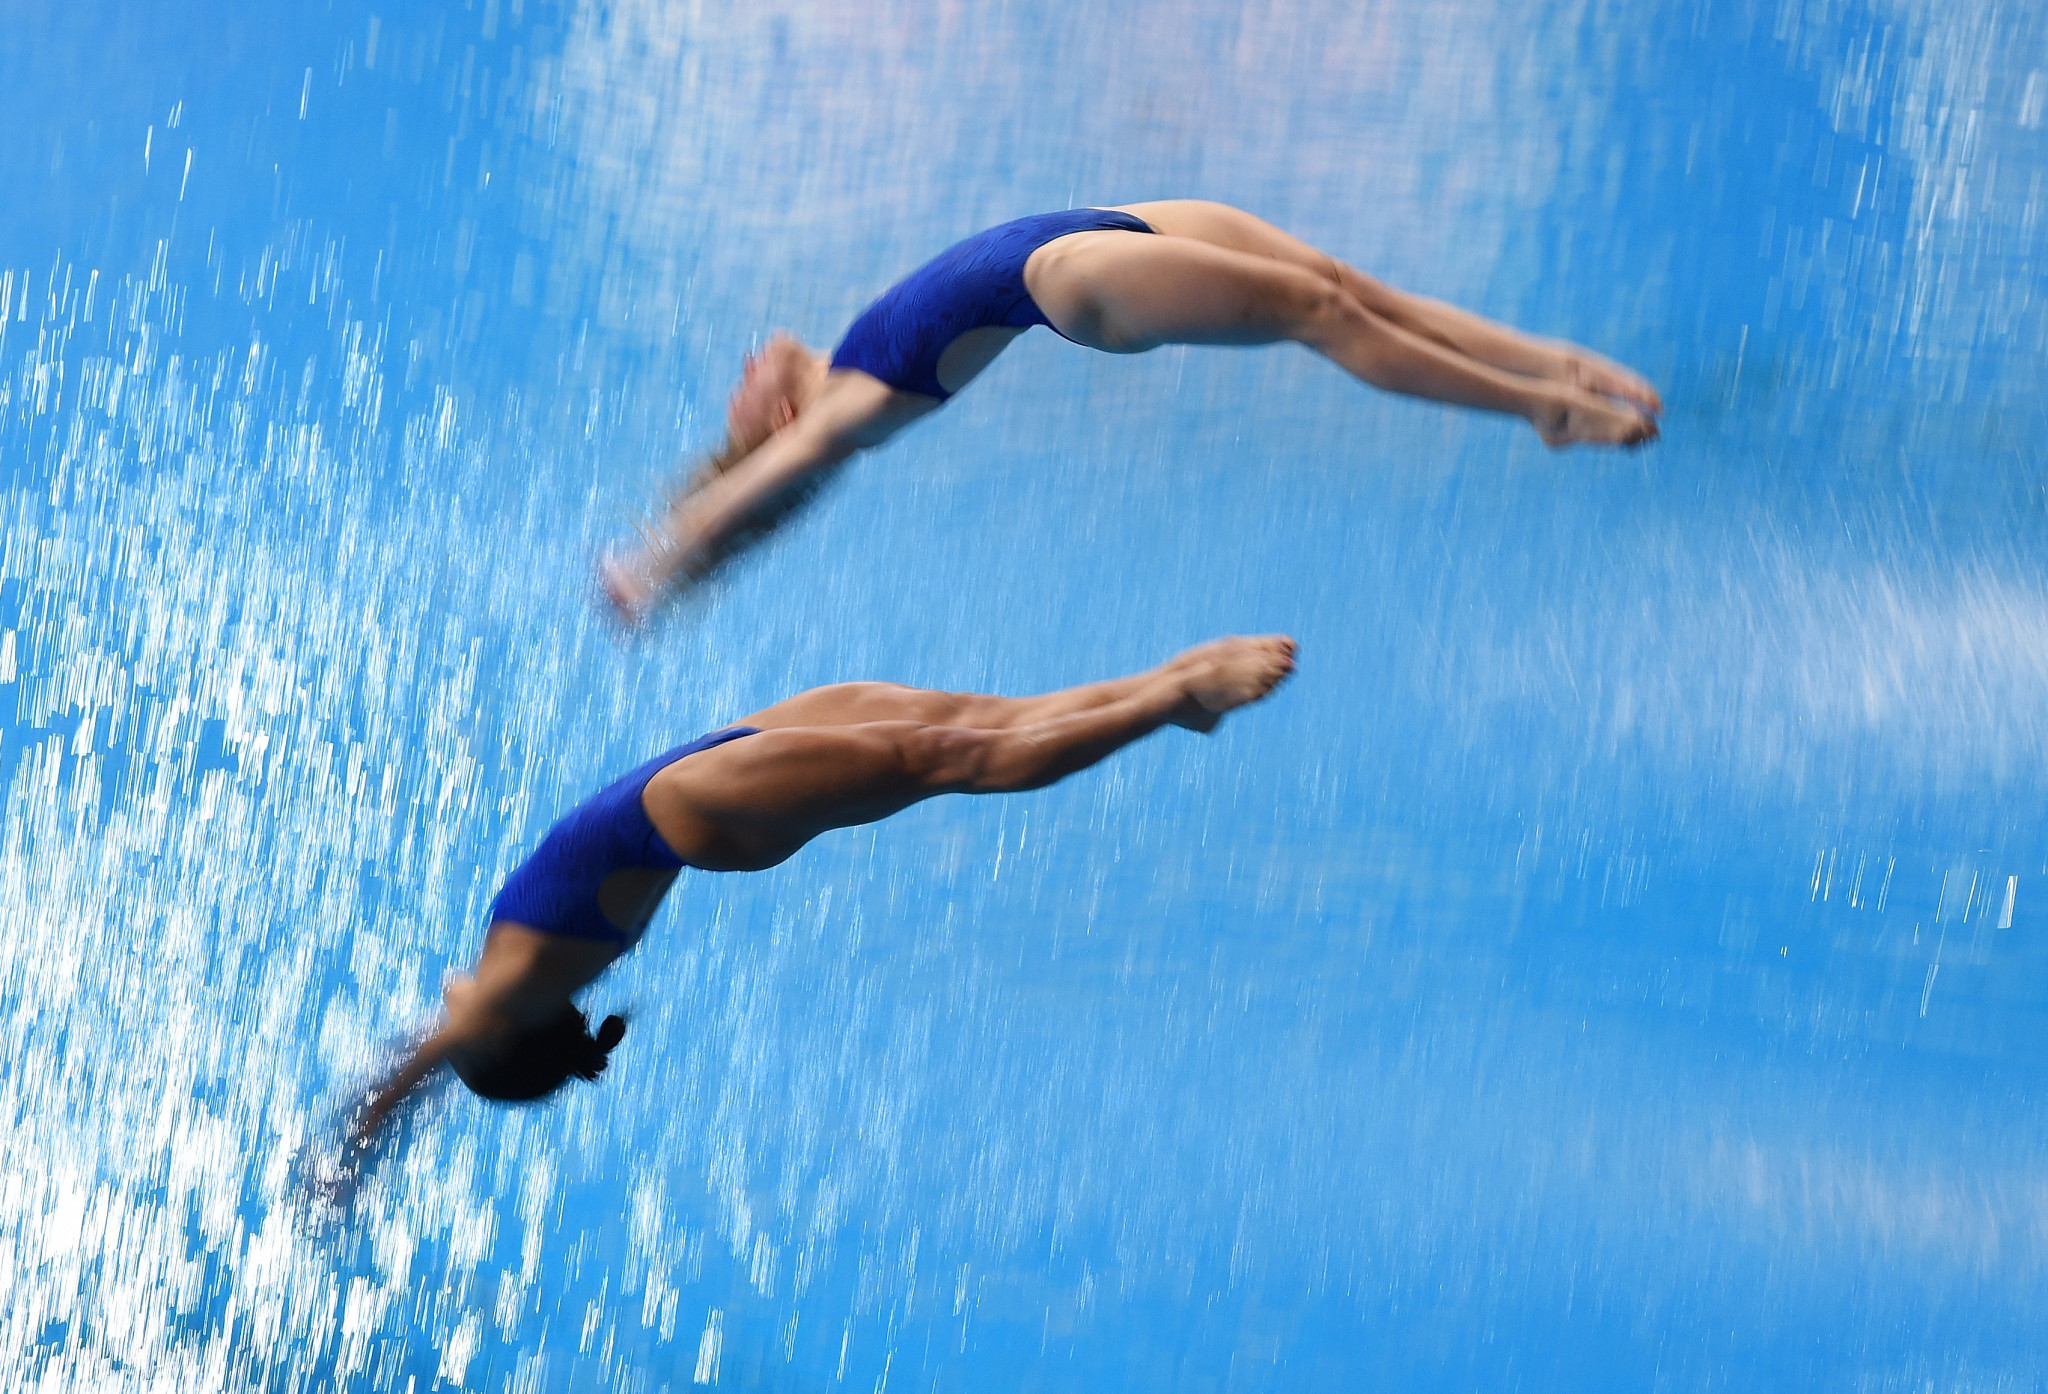 United States, Ukraine and Russia win golds on final day of FINA Diving Grand Prix in Rostock